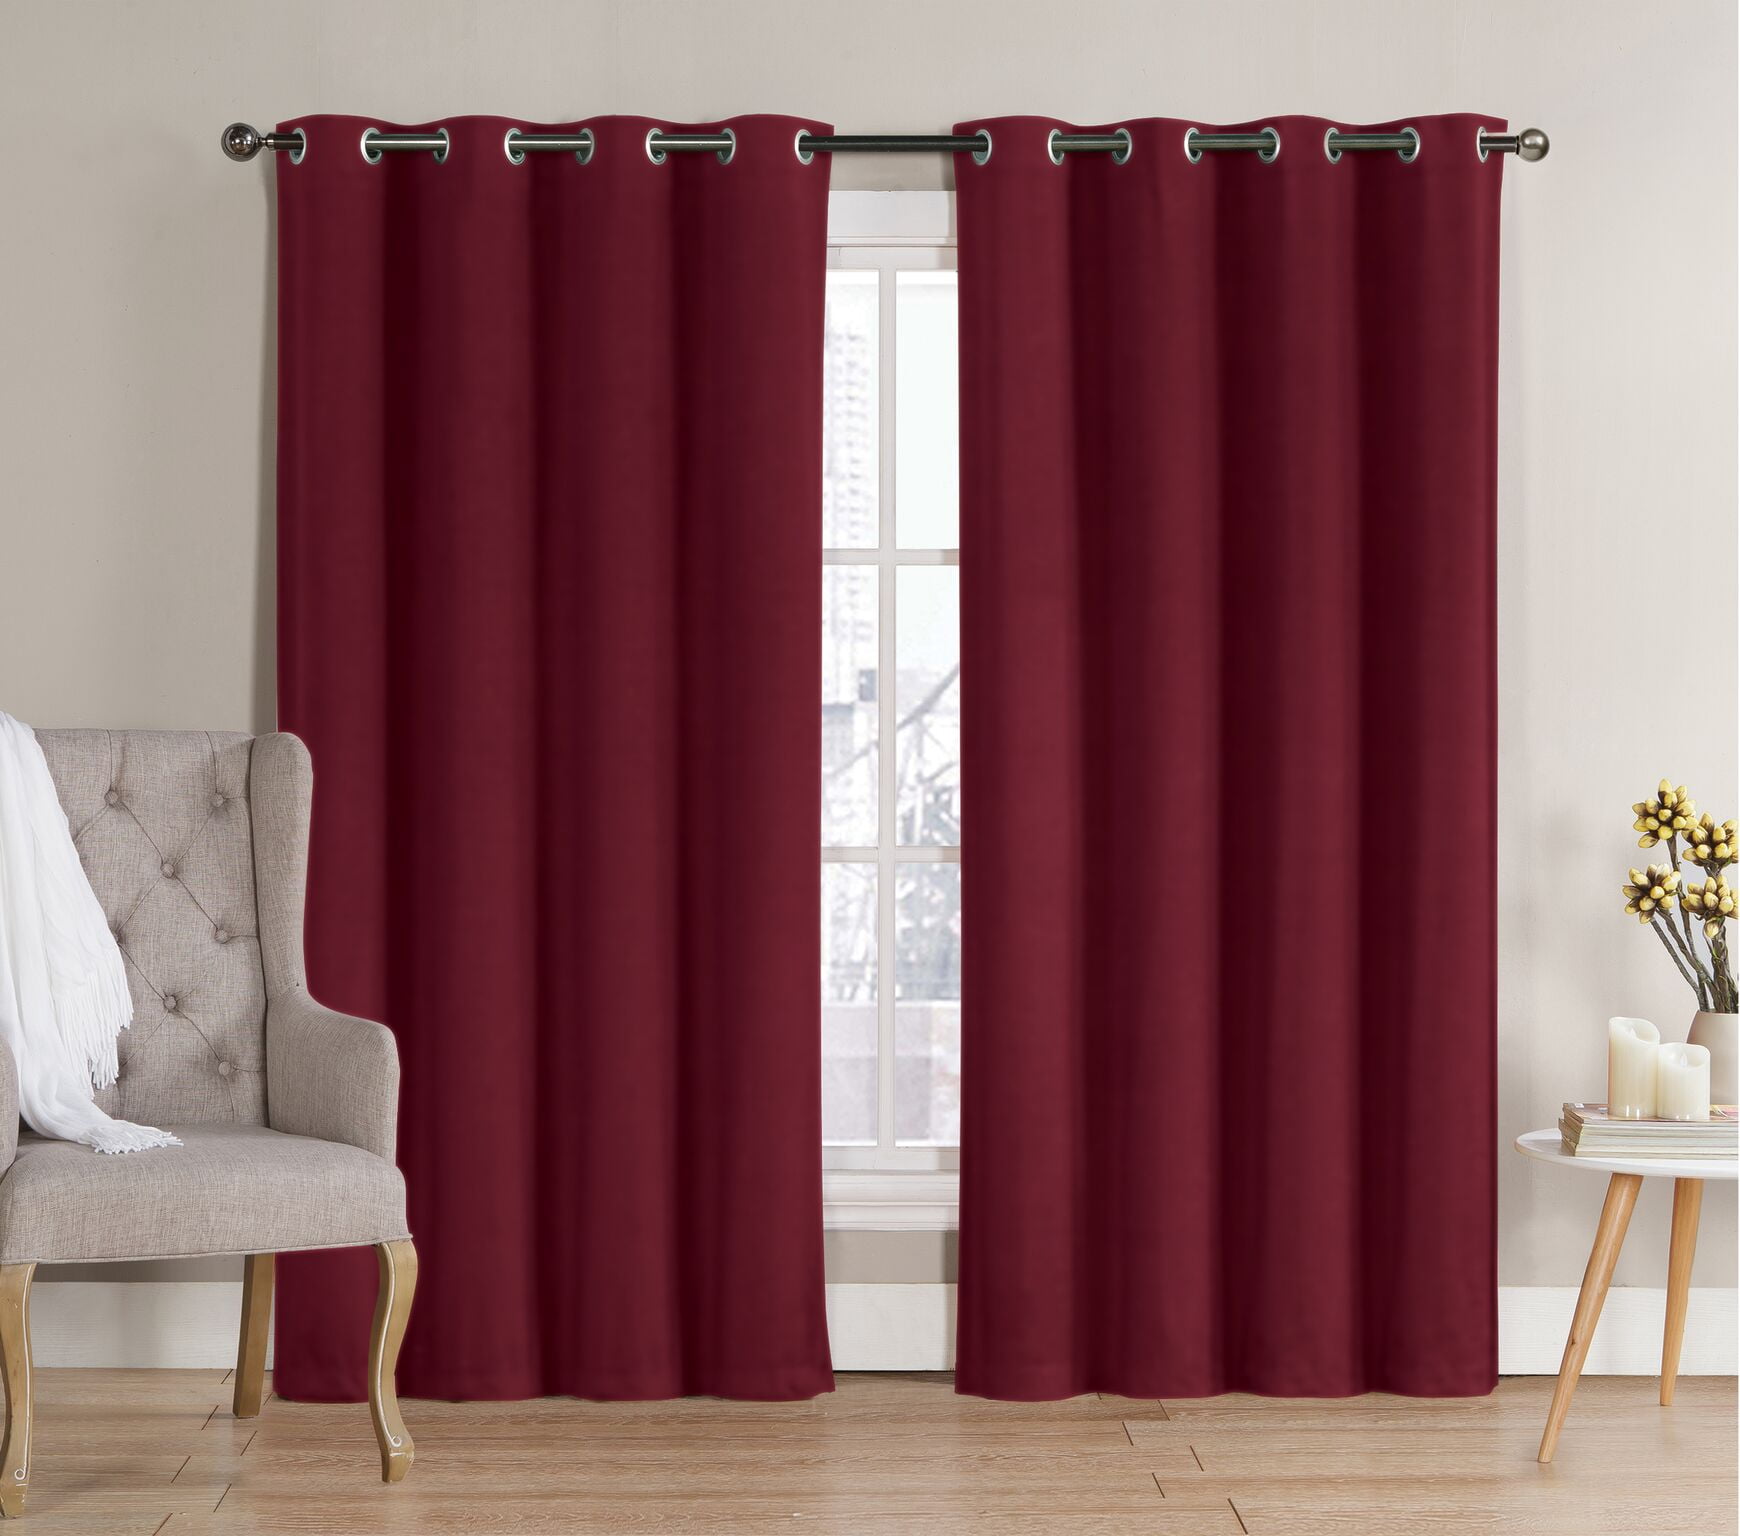 100% Blackout Panels Heavy Thick Grommet Bay Window Curtain 1 Set HOT PINK 